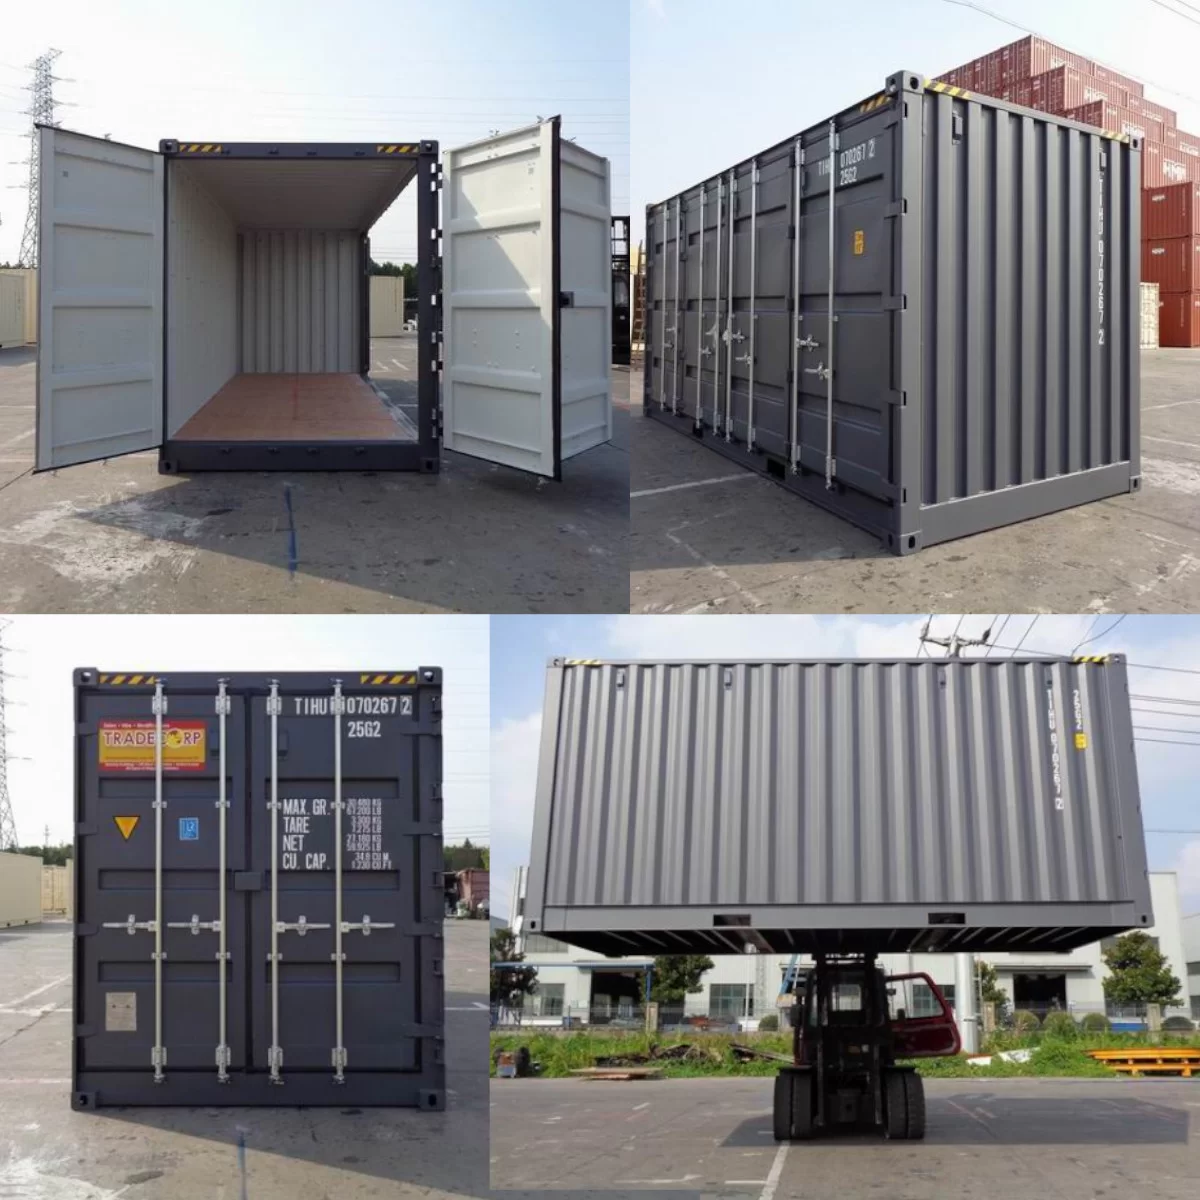 Shipping containers for sale in Pittsfield